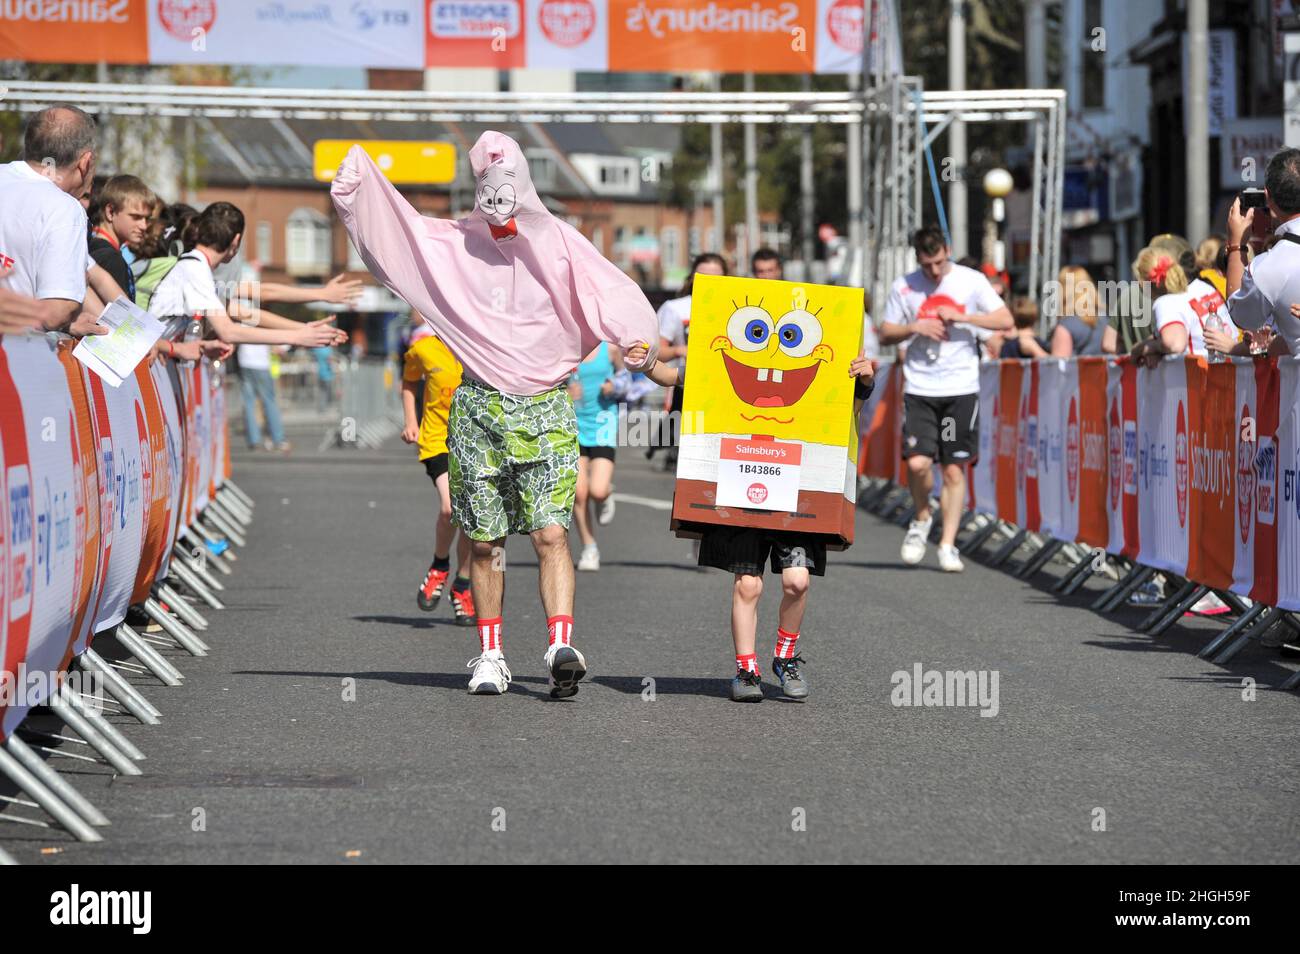 Adult man and boy run dressed as Patrick Star and Sponge Bob square pants for Sports relief cheered on by the crowds in Southampton on the  25th March 2012. Stock Photo